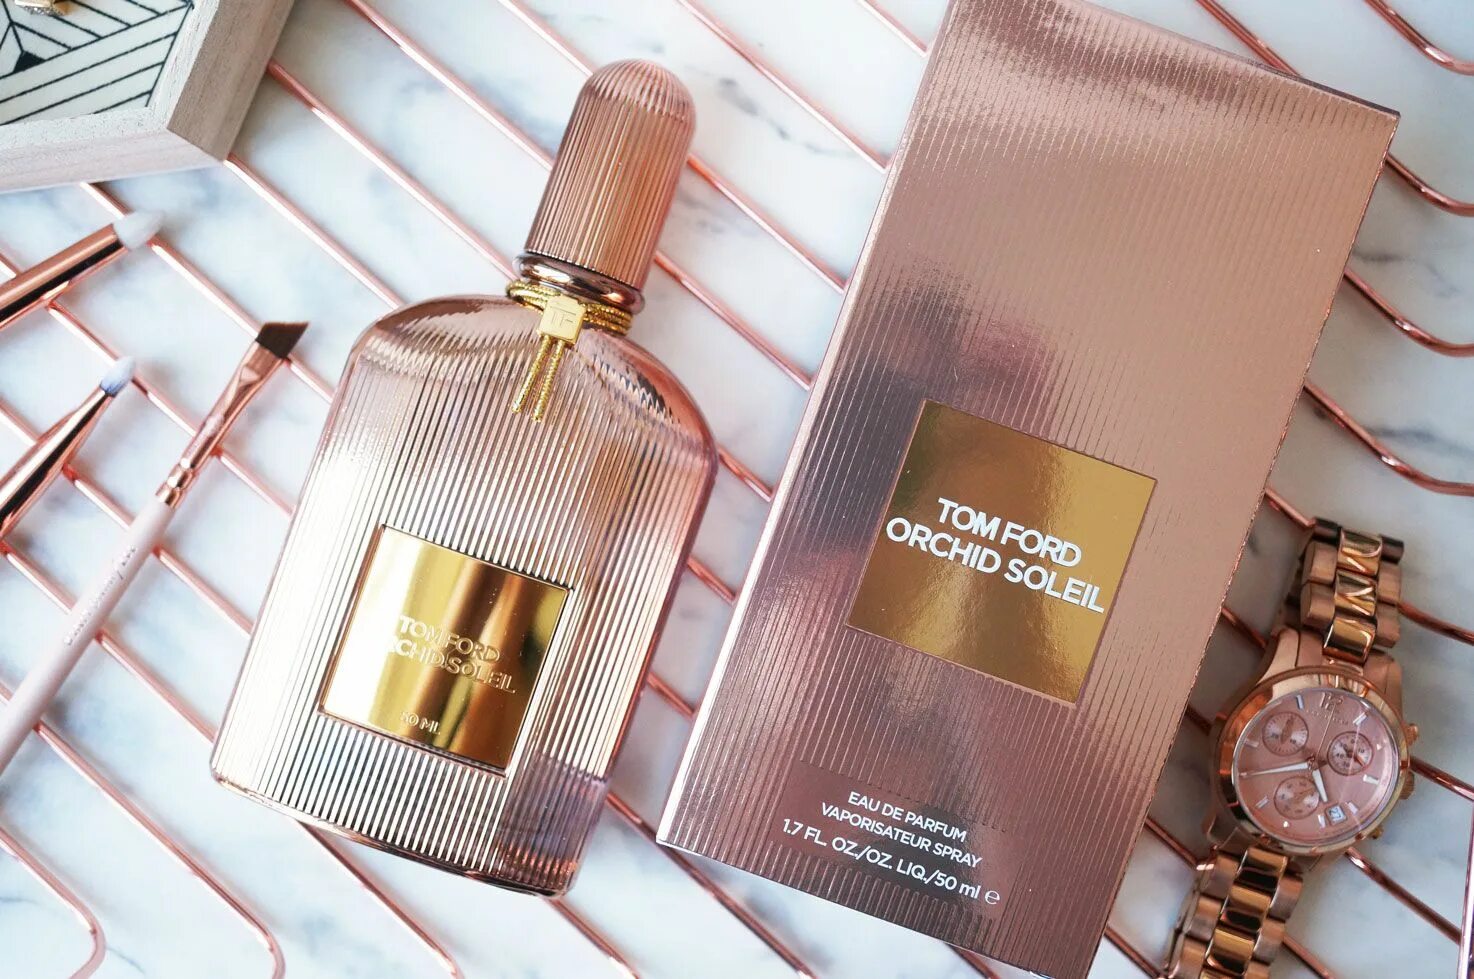 Tom Ford Orchid Soleil EDP 100ml Tester. Tom Ford Orchid Soleil 100 ml. Tom Ford "Orchid Soleil Eau de Parfum" 100 ml. Tom Ford Orchid Soleil, EDP women 100 ml. Том форд золотые духи